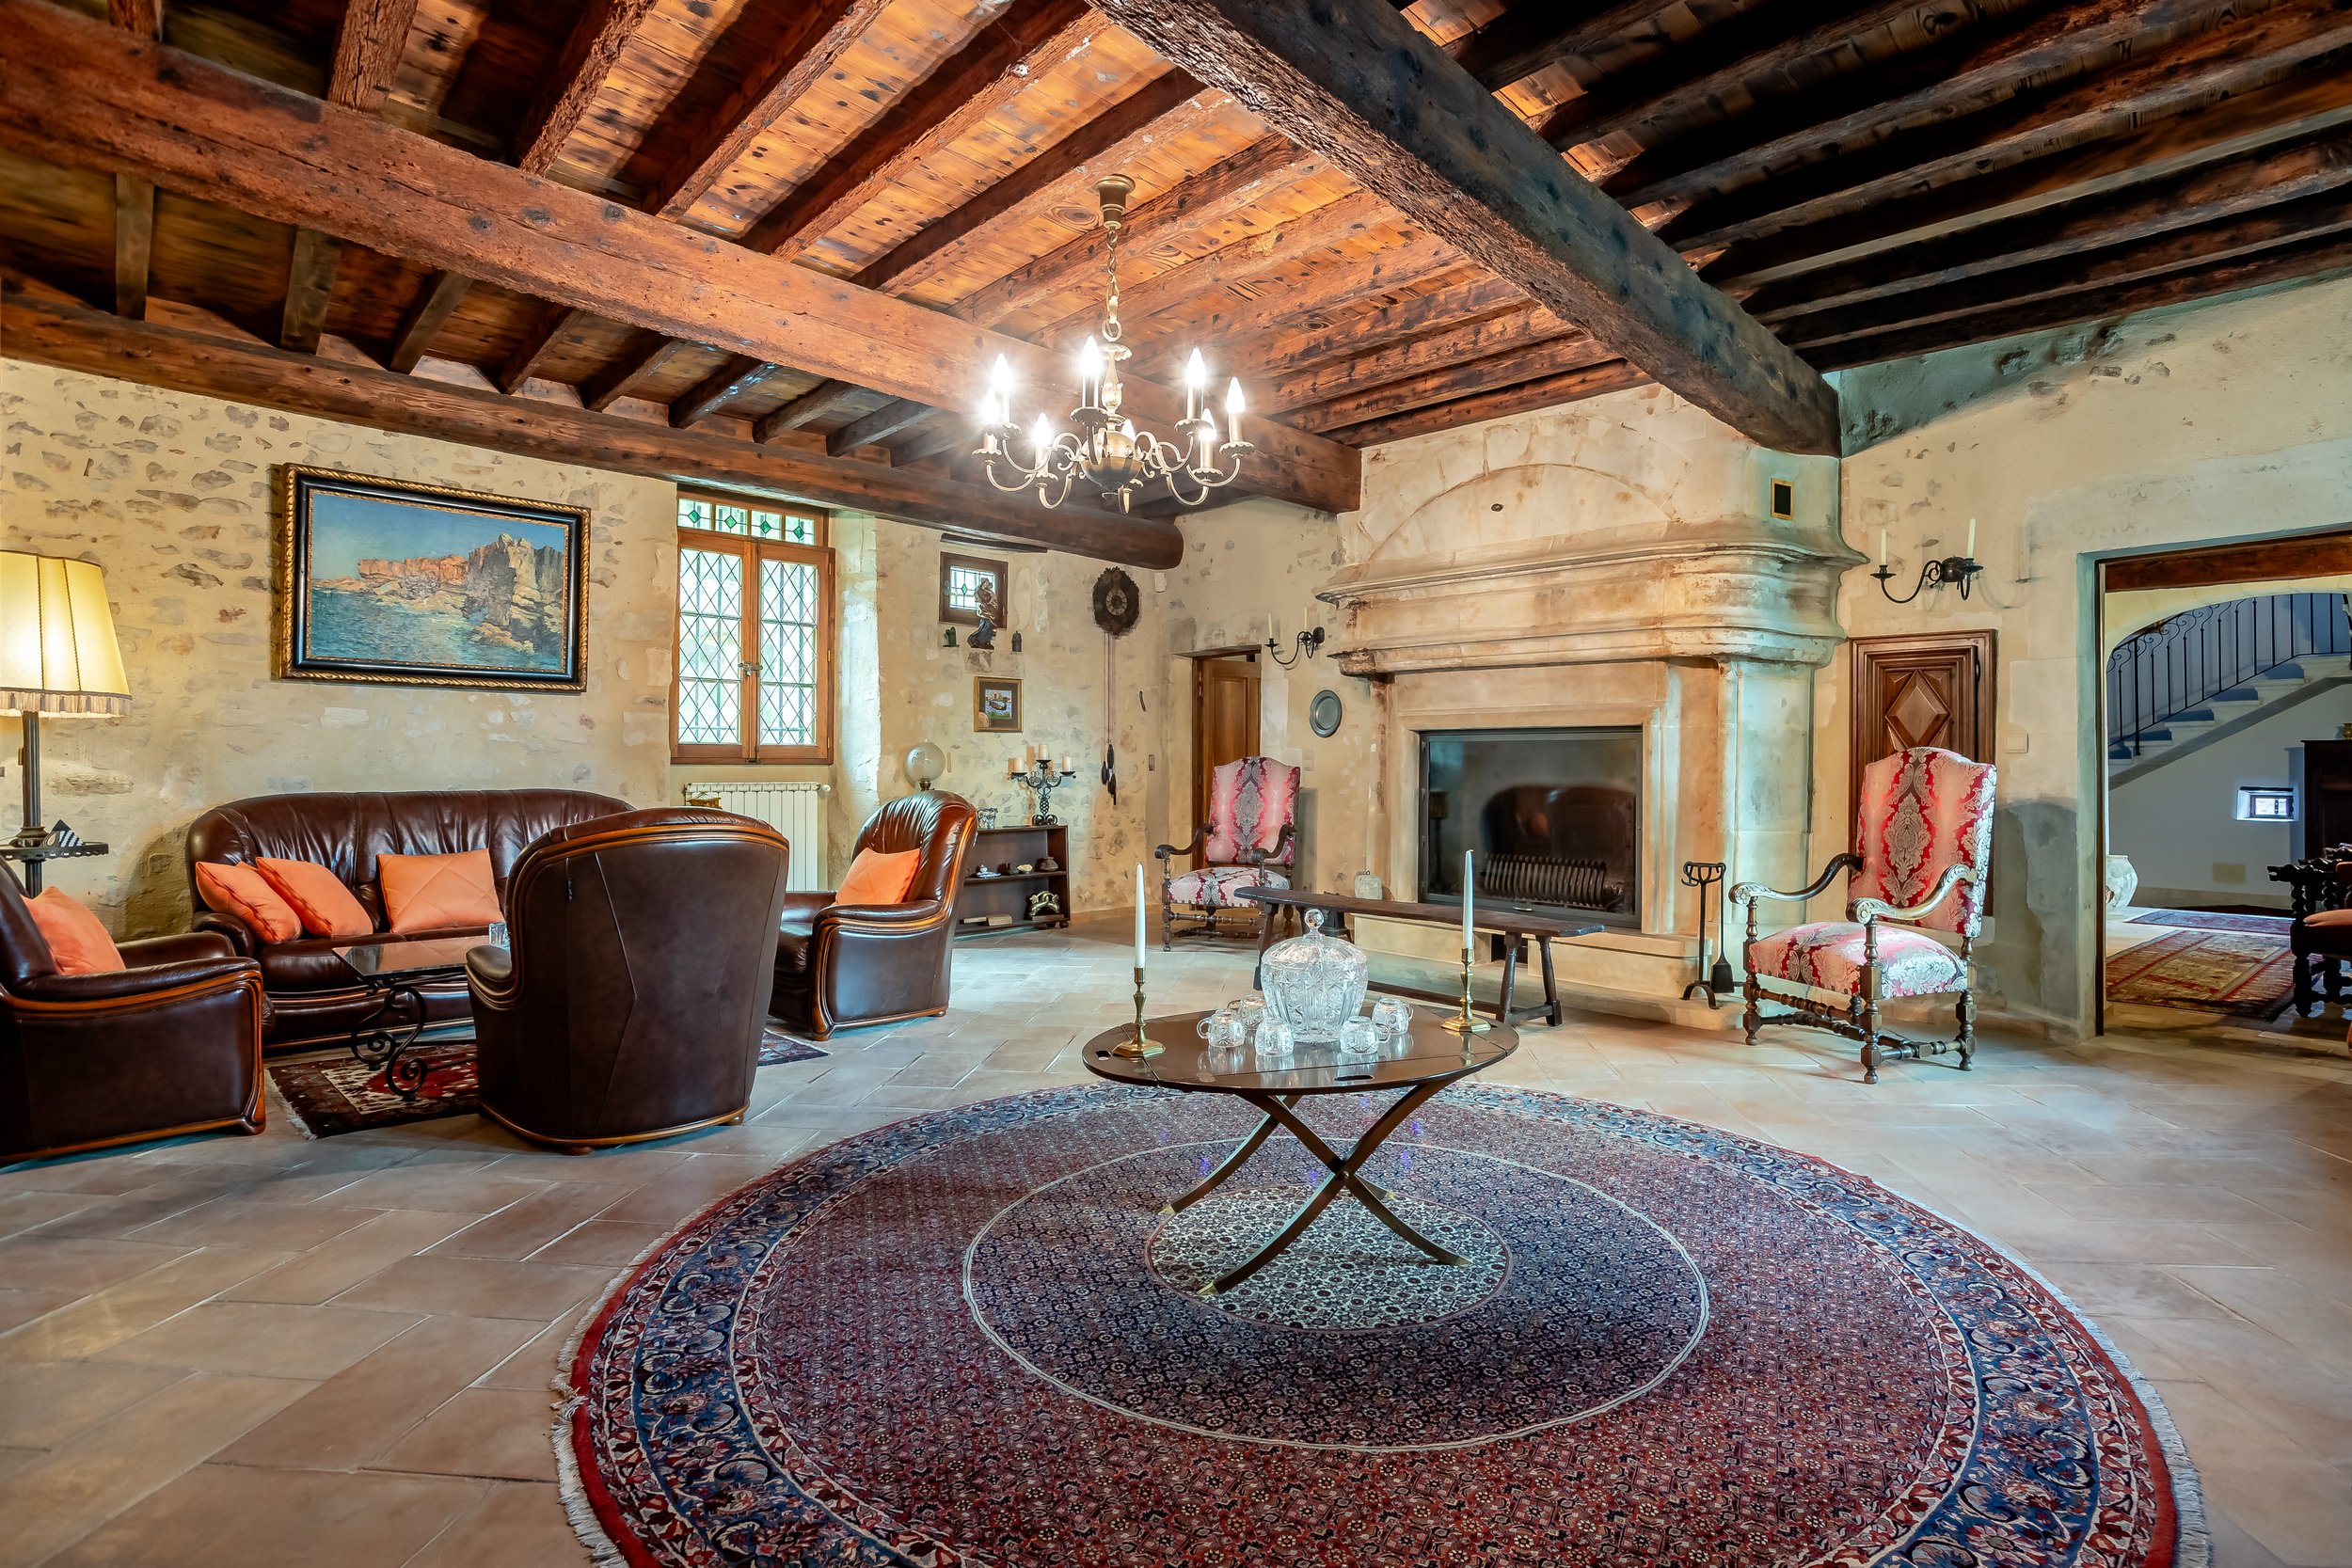 Francis+York+Renovated Historic Residence and 98 Acre Estate in Provence, France  00010.jpg